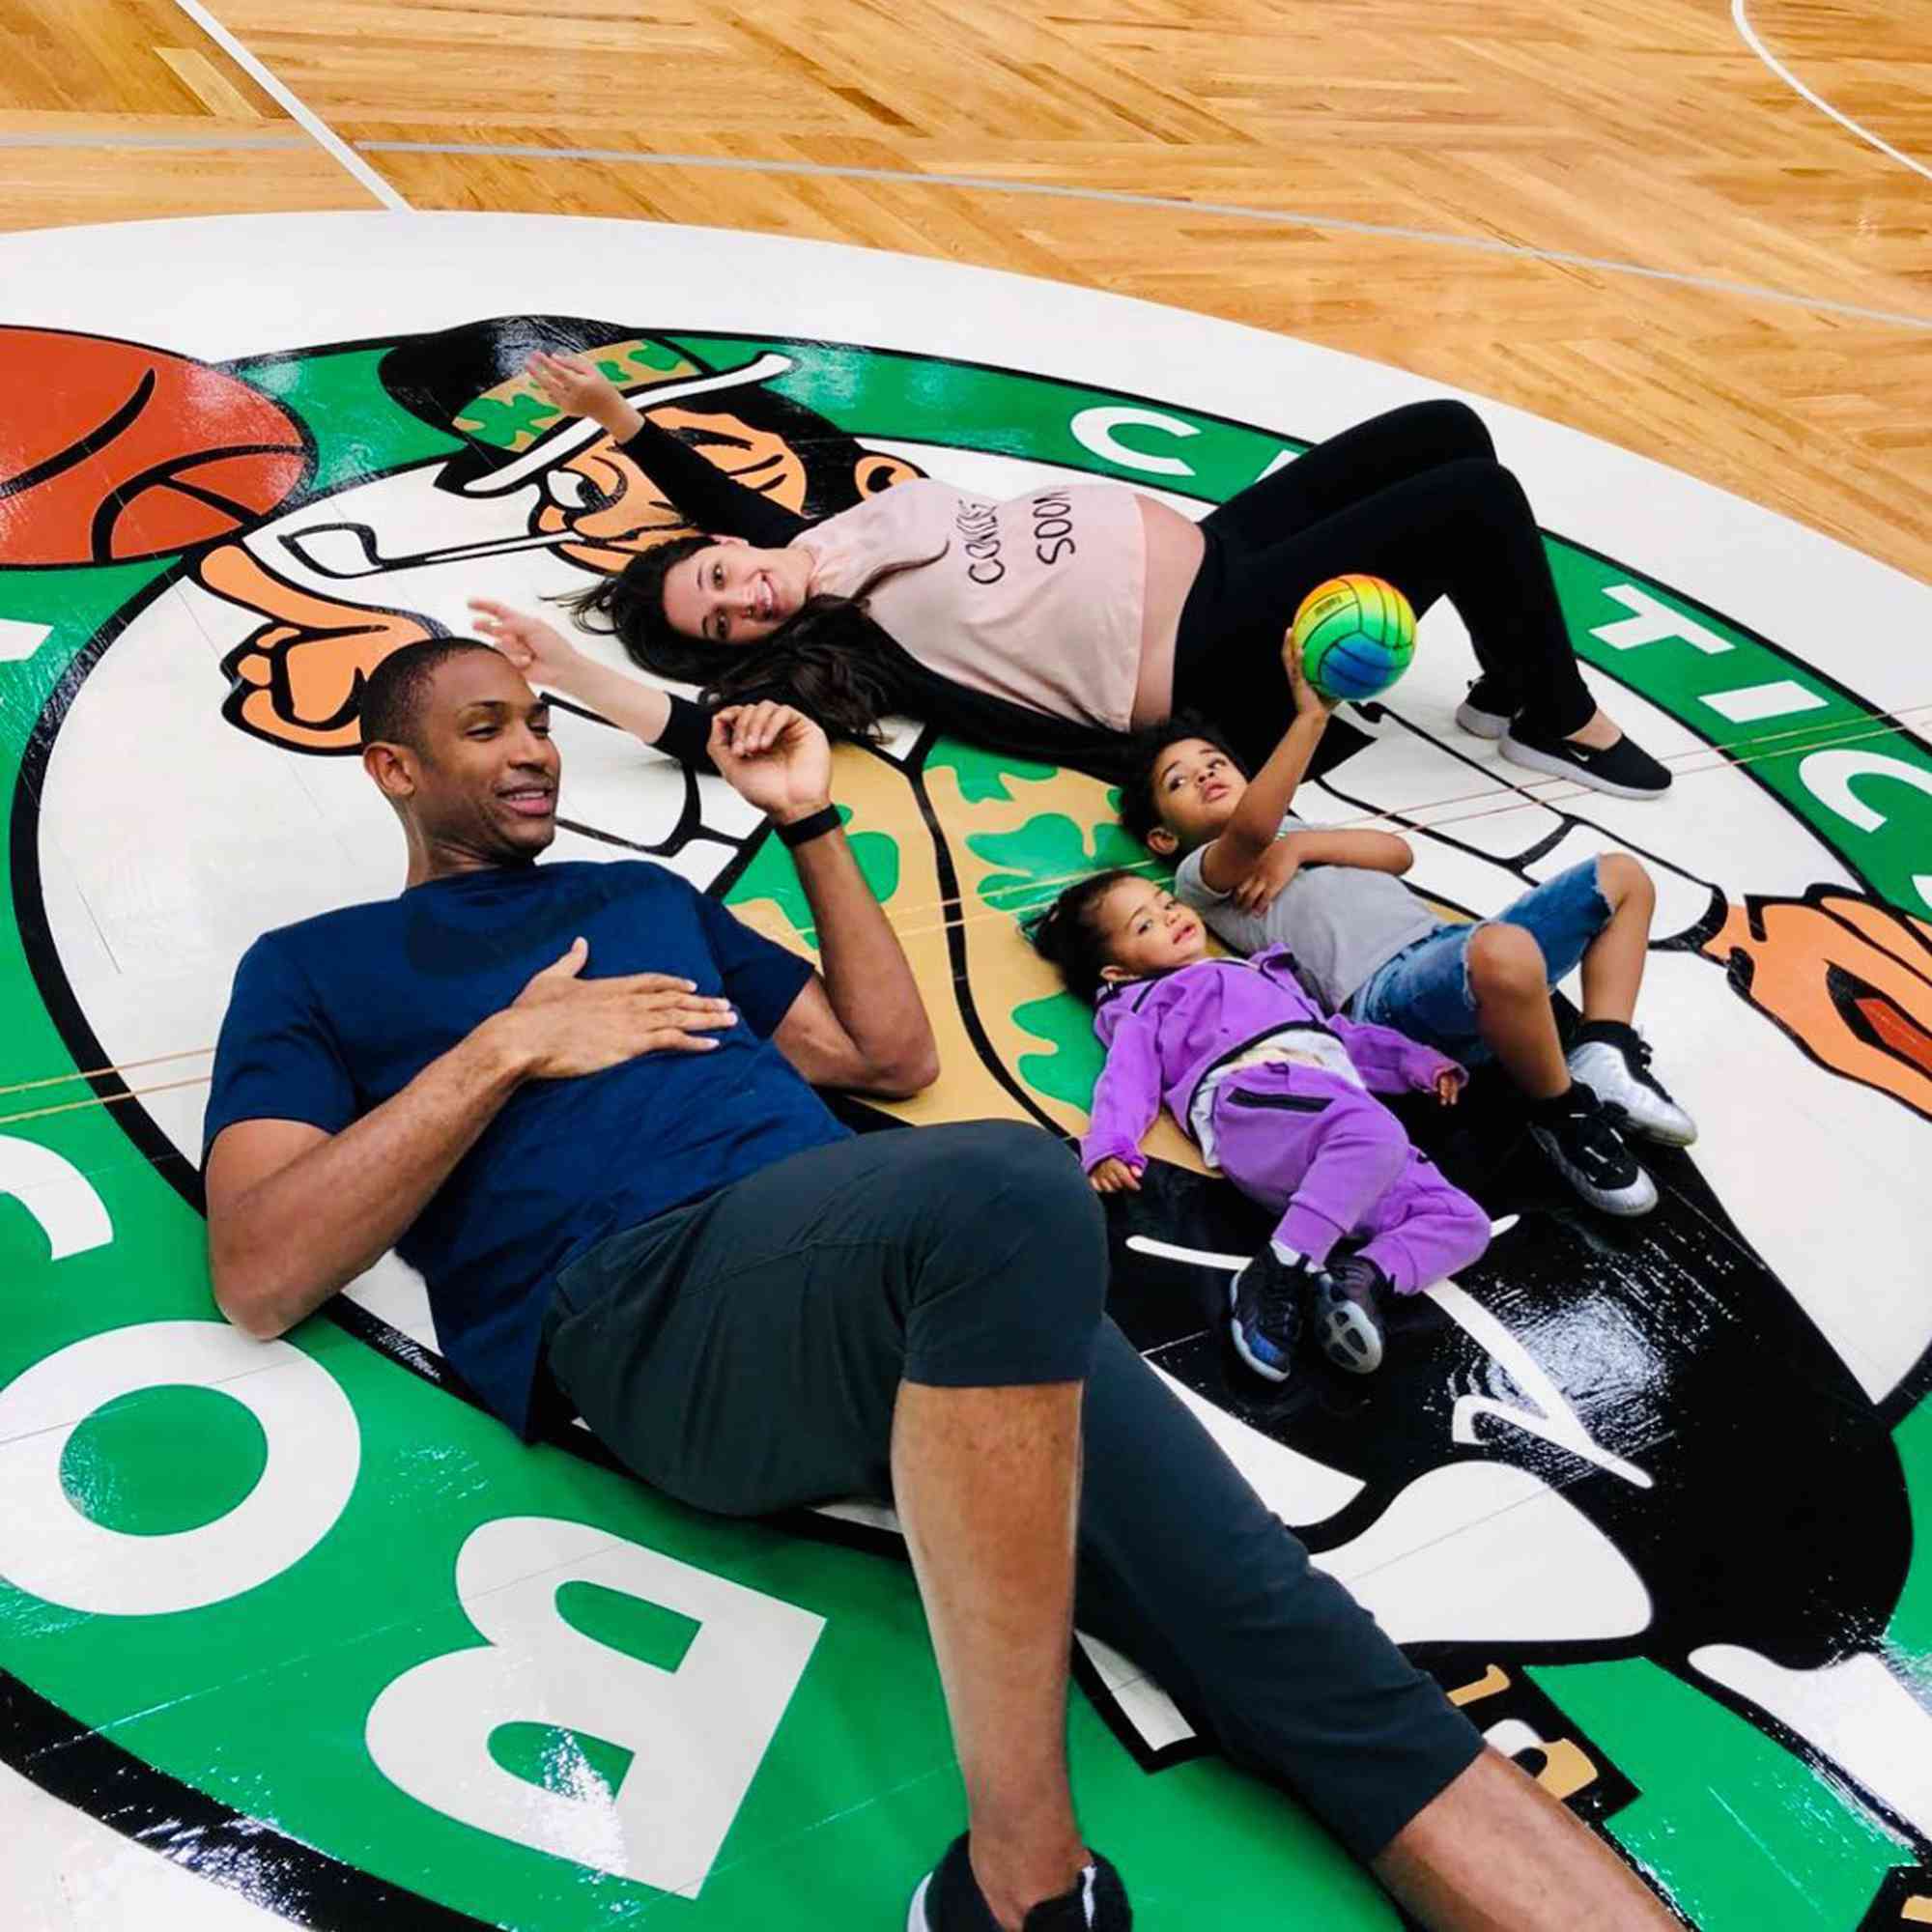 Al Horford and Amelia Vega with their kids.